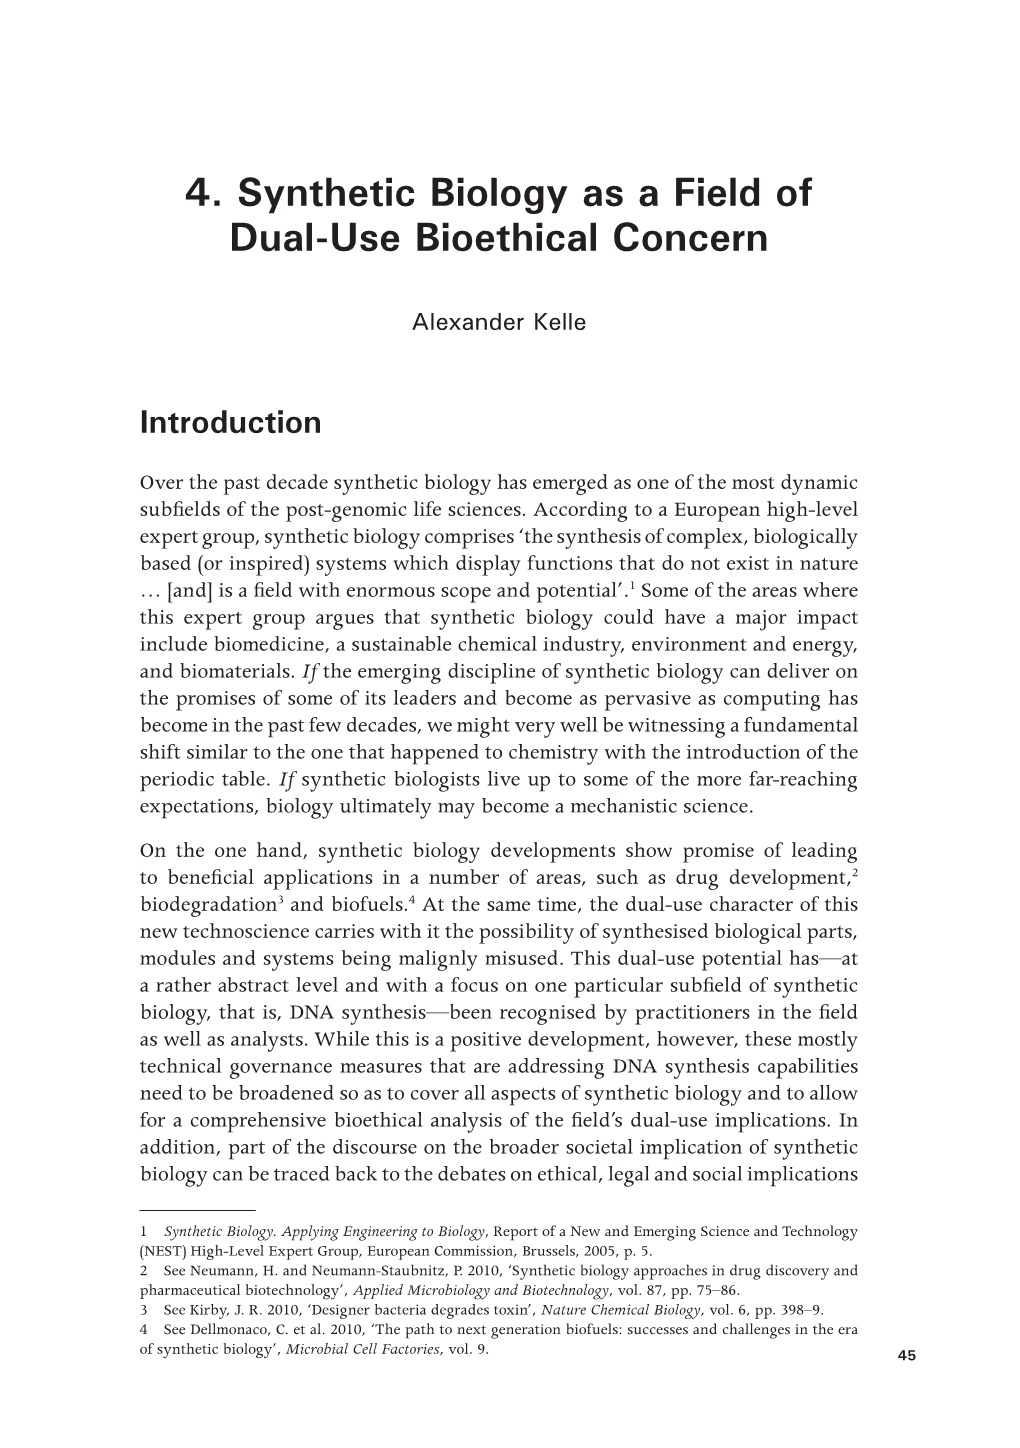 4. Synthetic Biology As a Field of Dual-Use Bioethical Concern